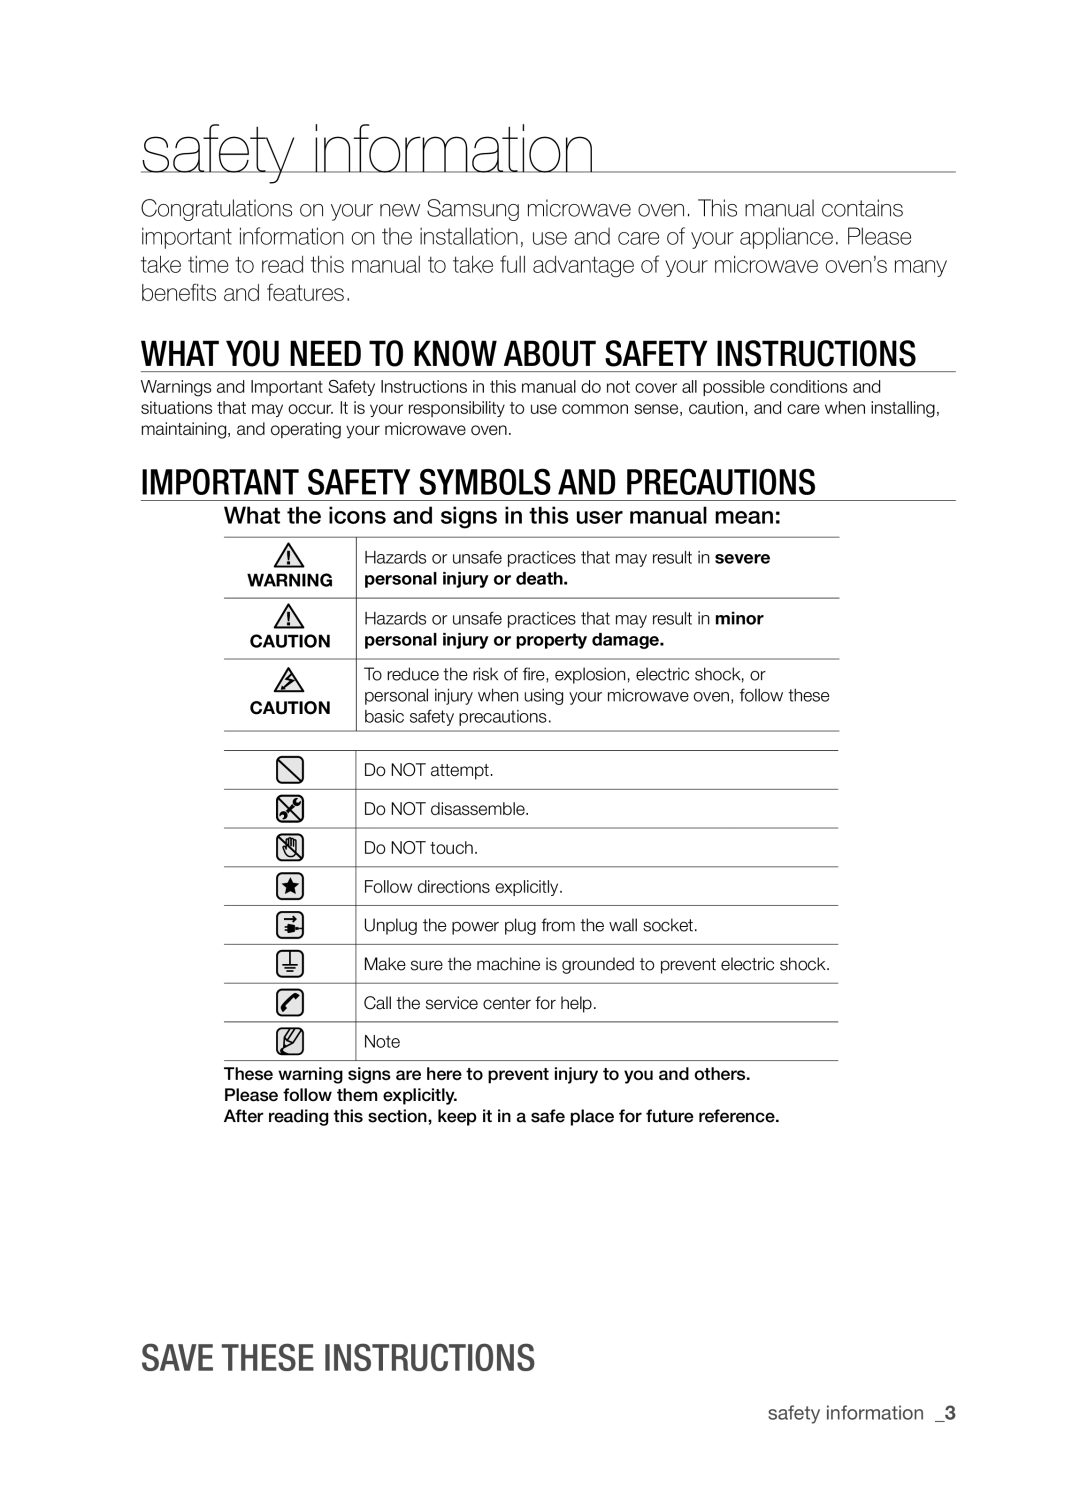 Samsung SMH9207 user manual Save these instructions, What you need to know about safety instructions, safety information 